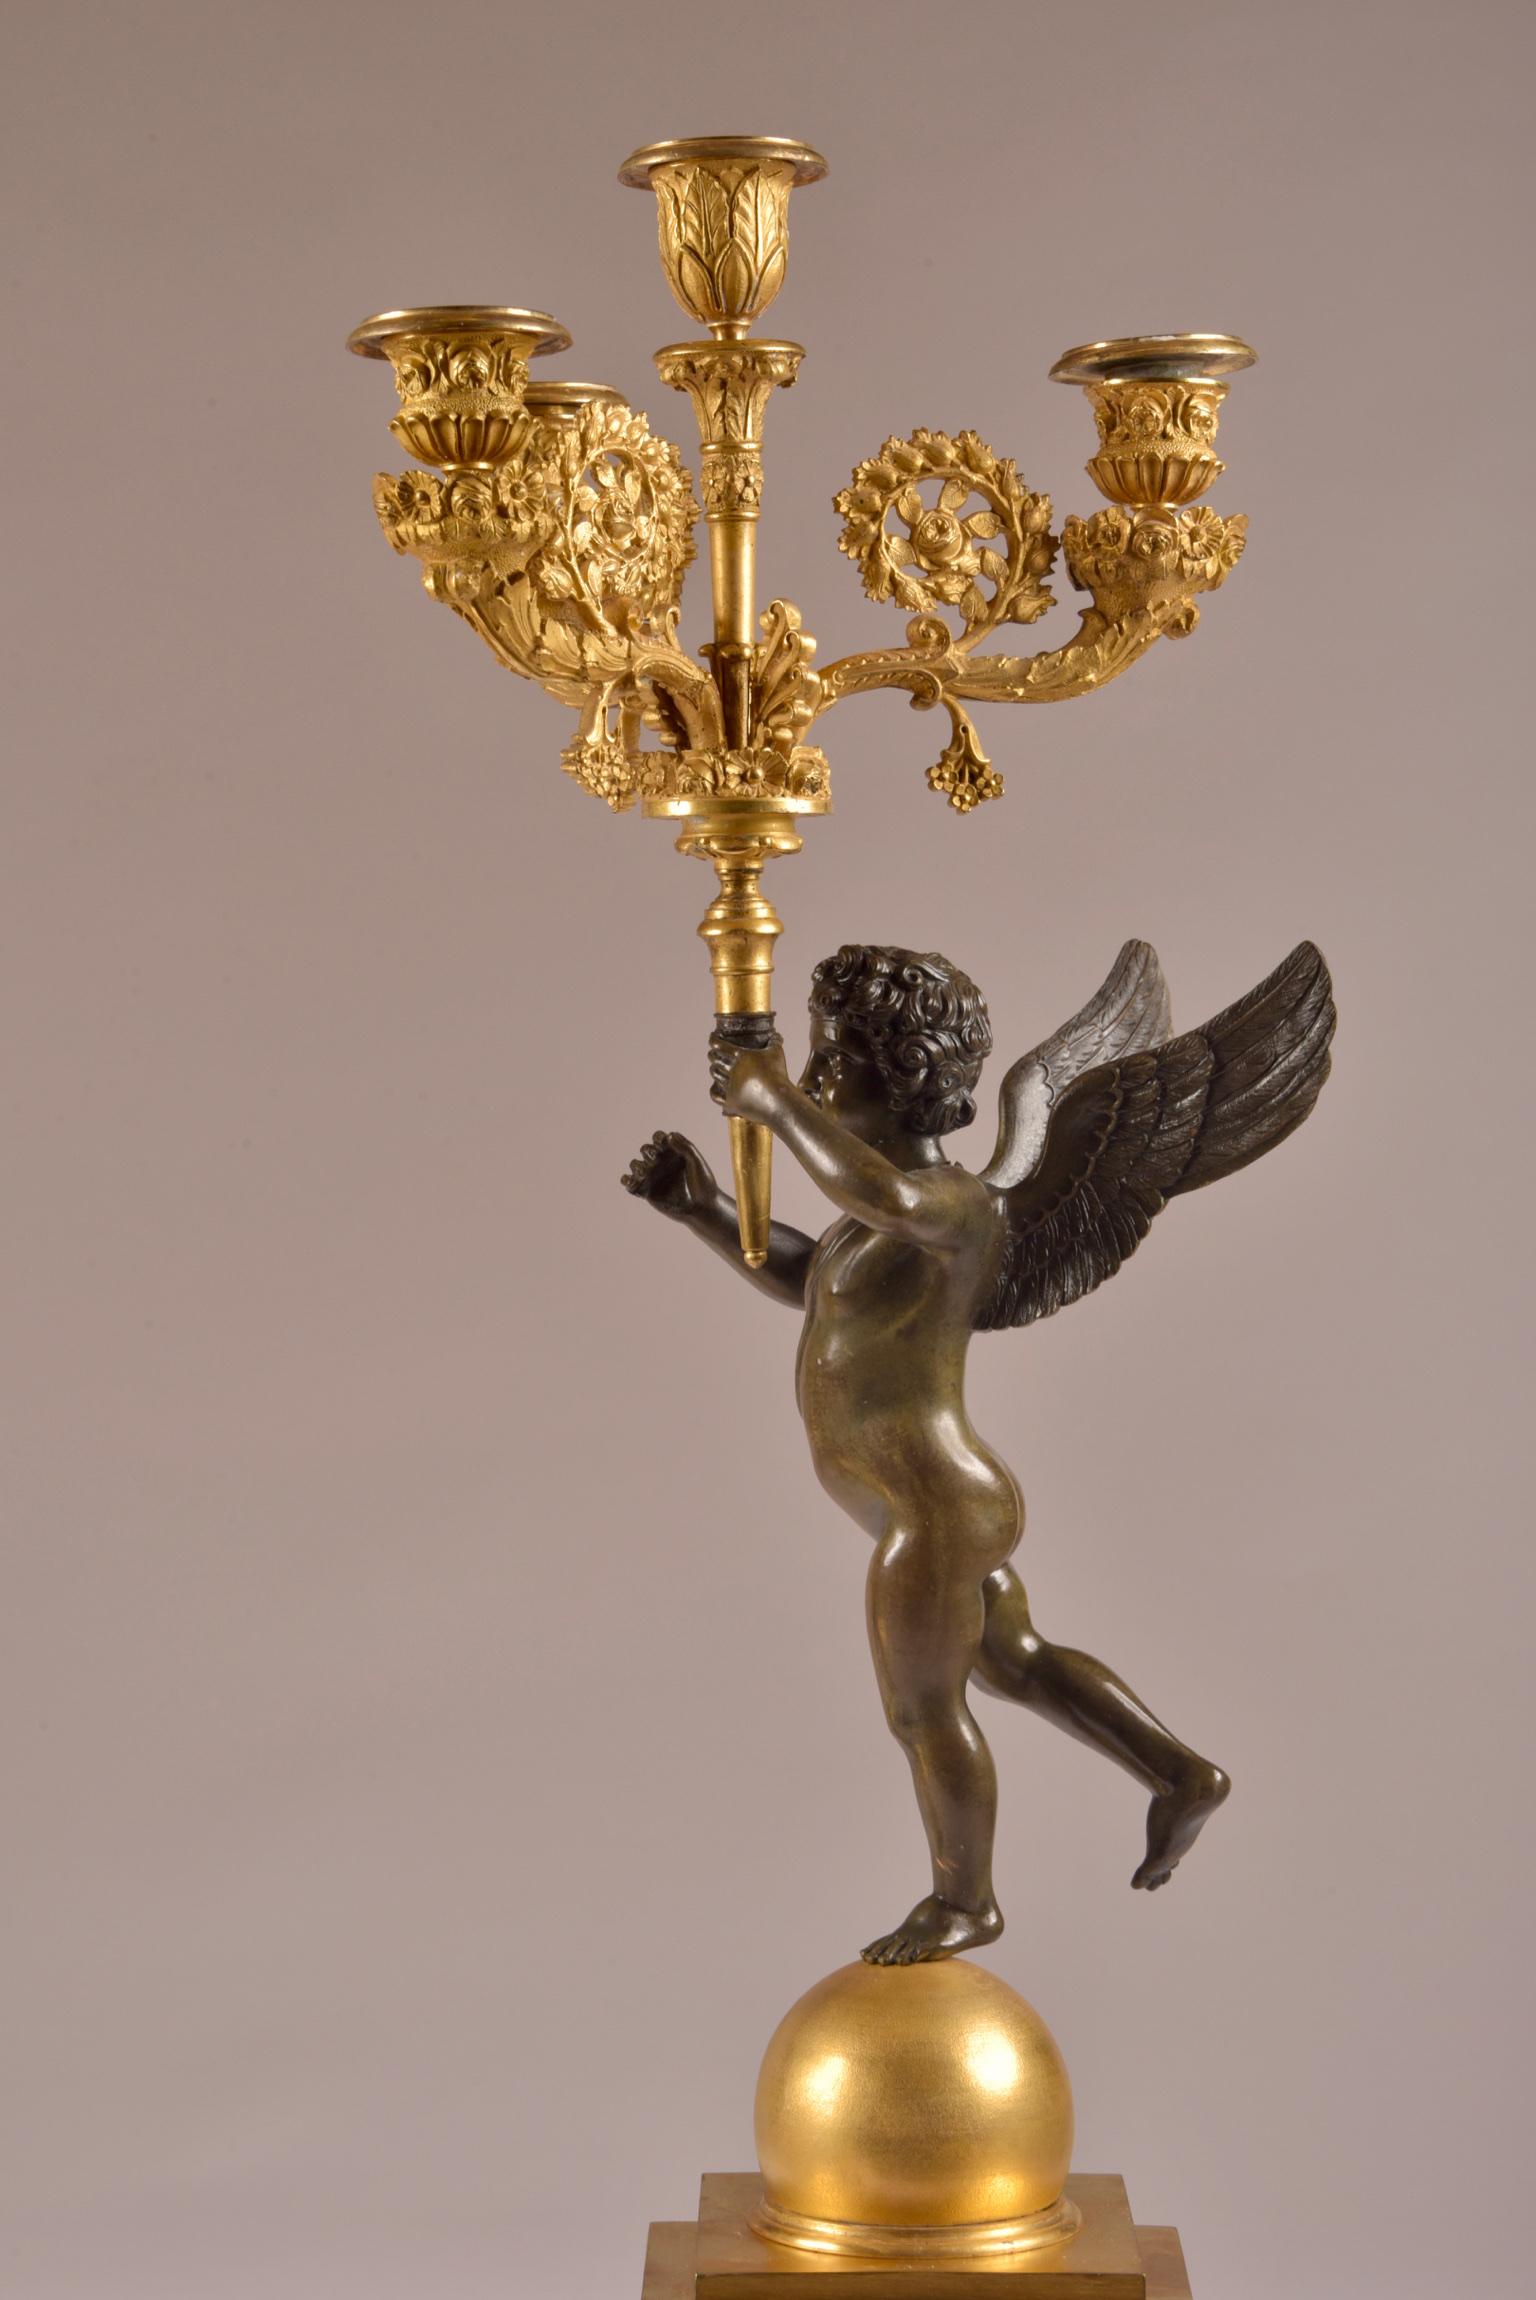 Pair of French Empire Candelabras with Putti, Superb Ormolu Candleholders, 1810  im Angebot 1